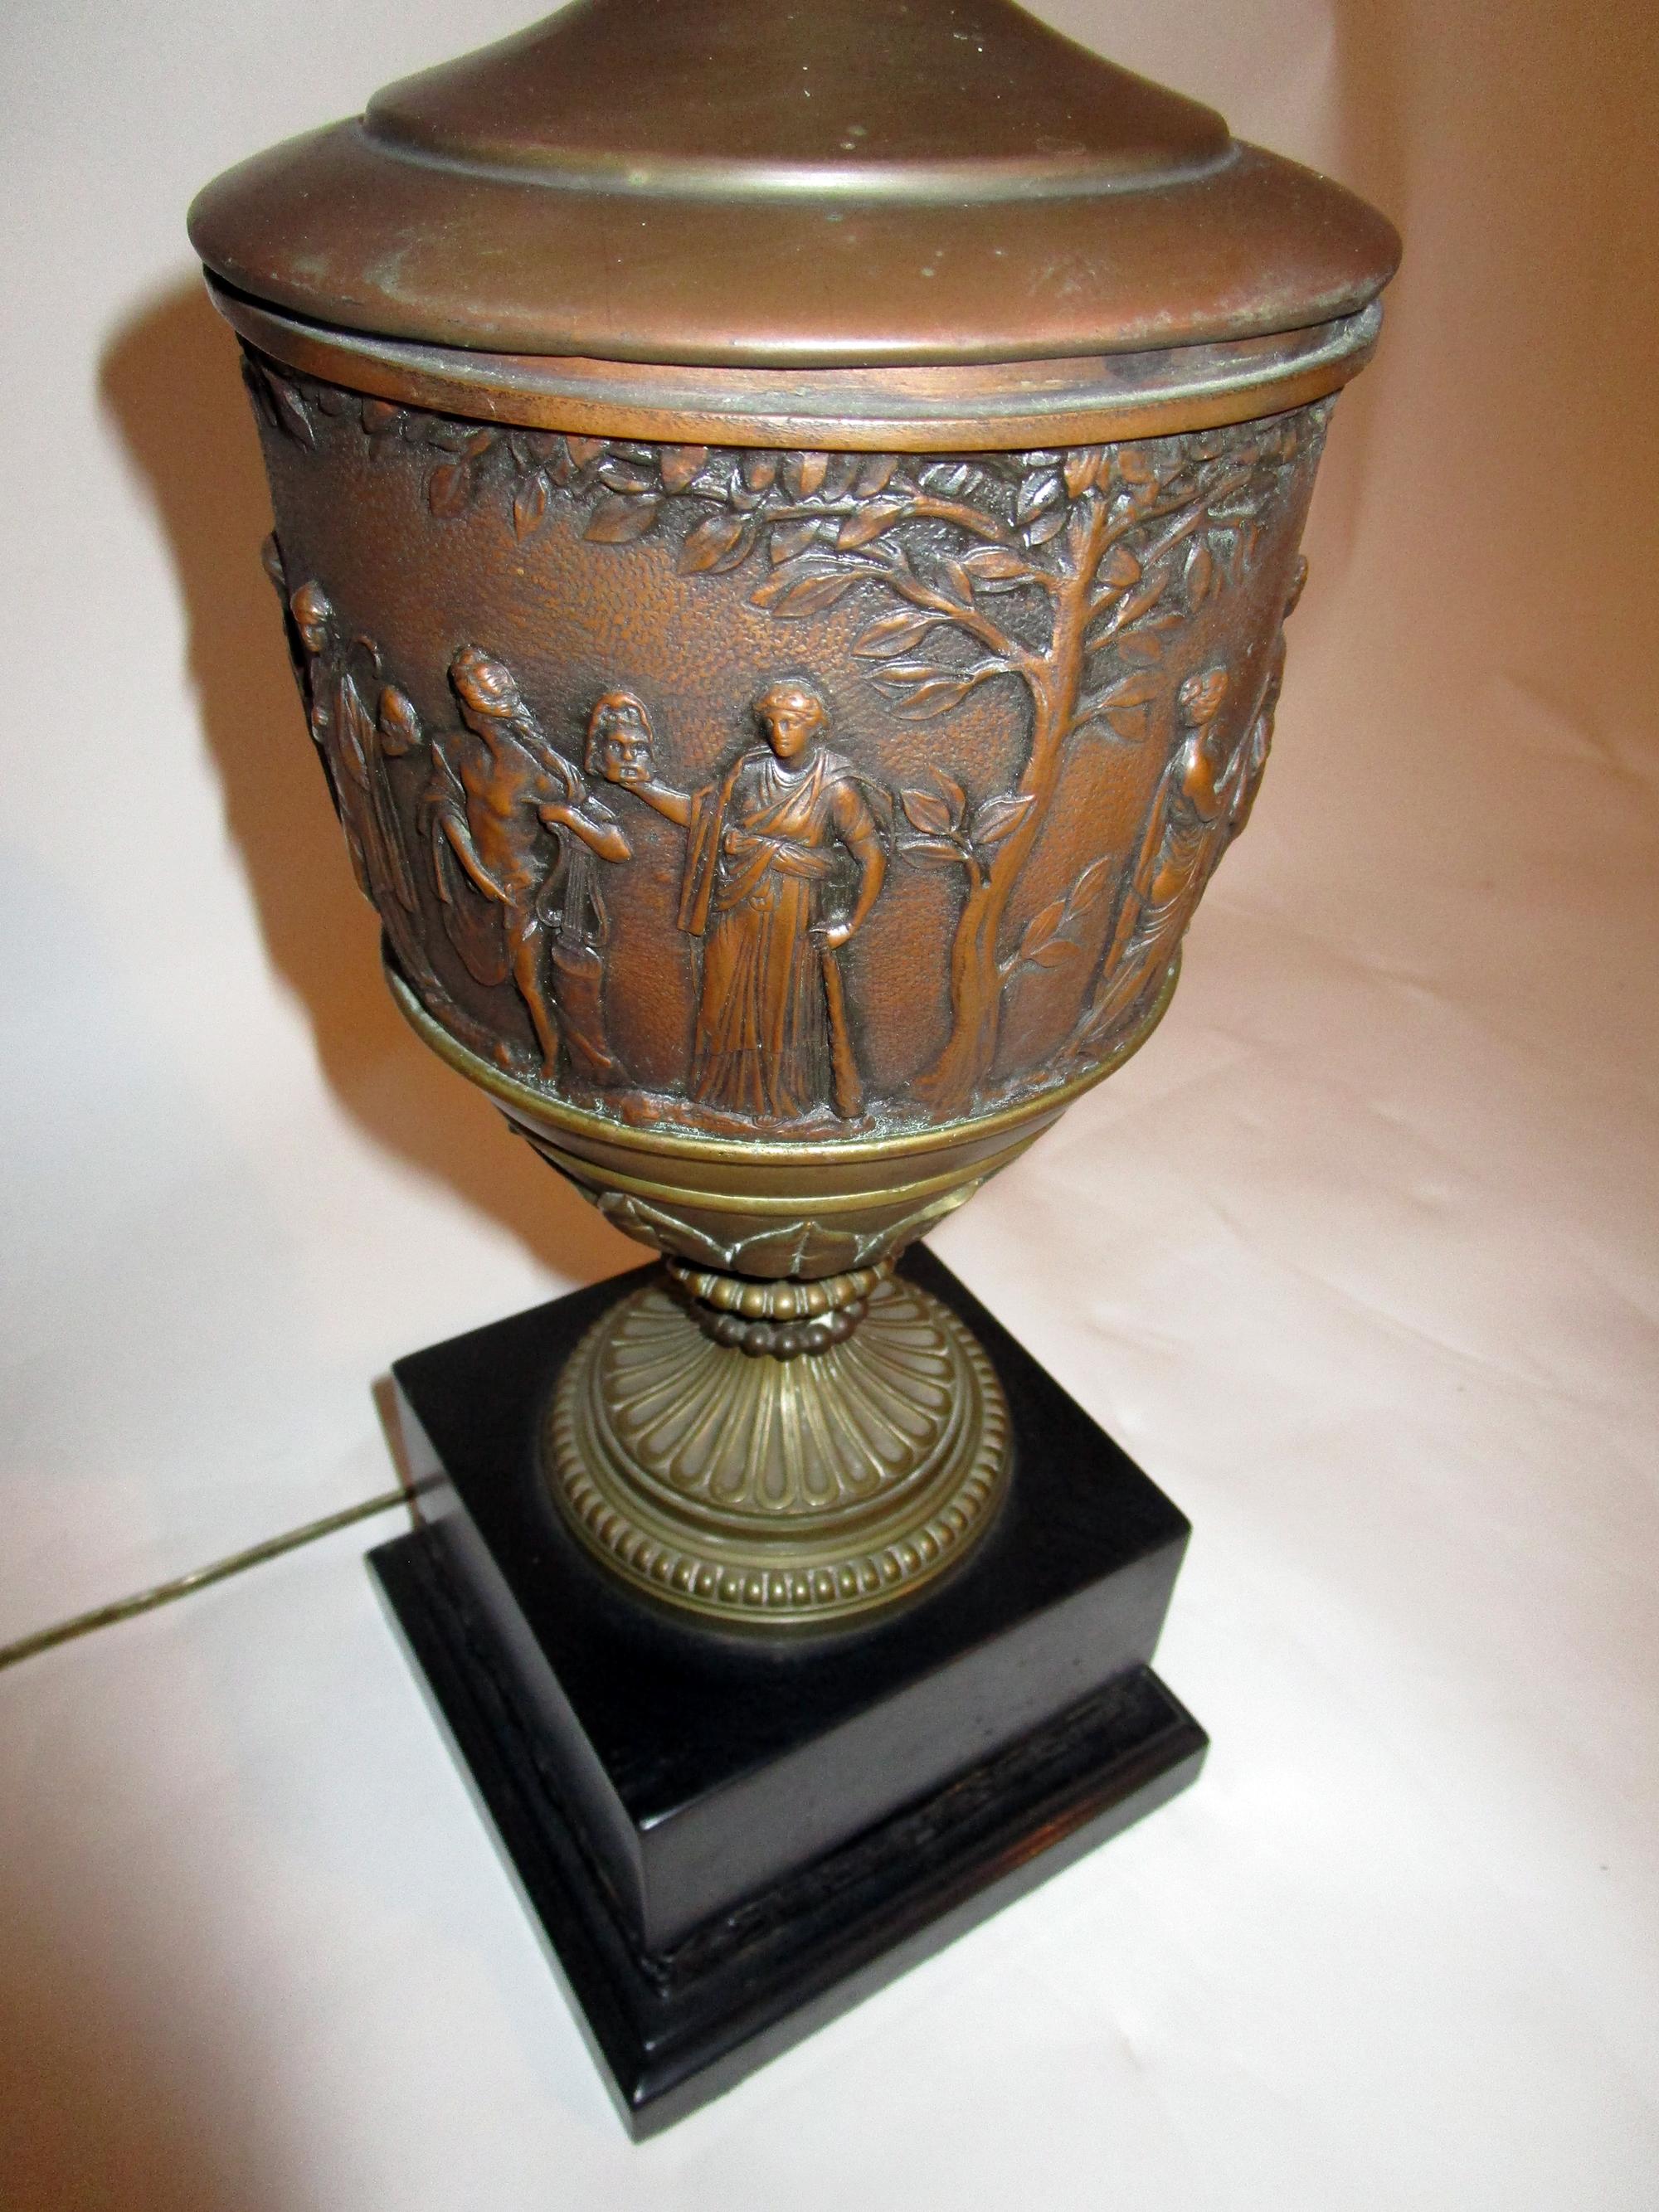 Handsome patinated brass urn converted into a lamp. Four laurel trees and ten different male and female figures, all in classical dress, in circle the urn which includes a pedestal of laurel leaves. The urn in mounted on an onyx square plinth with a